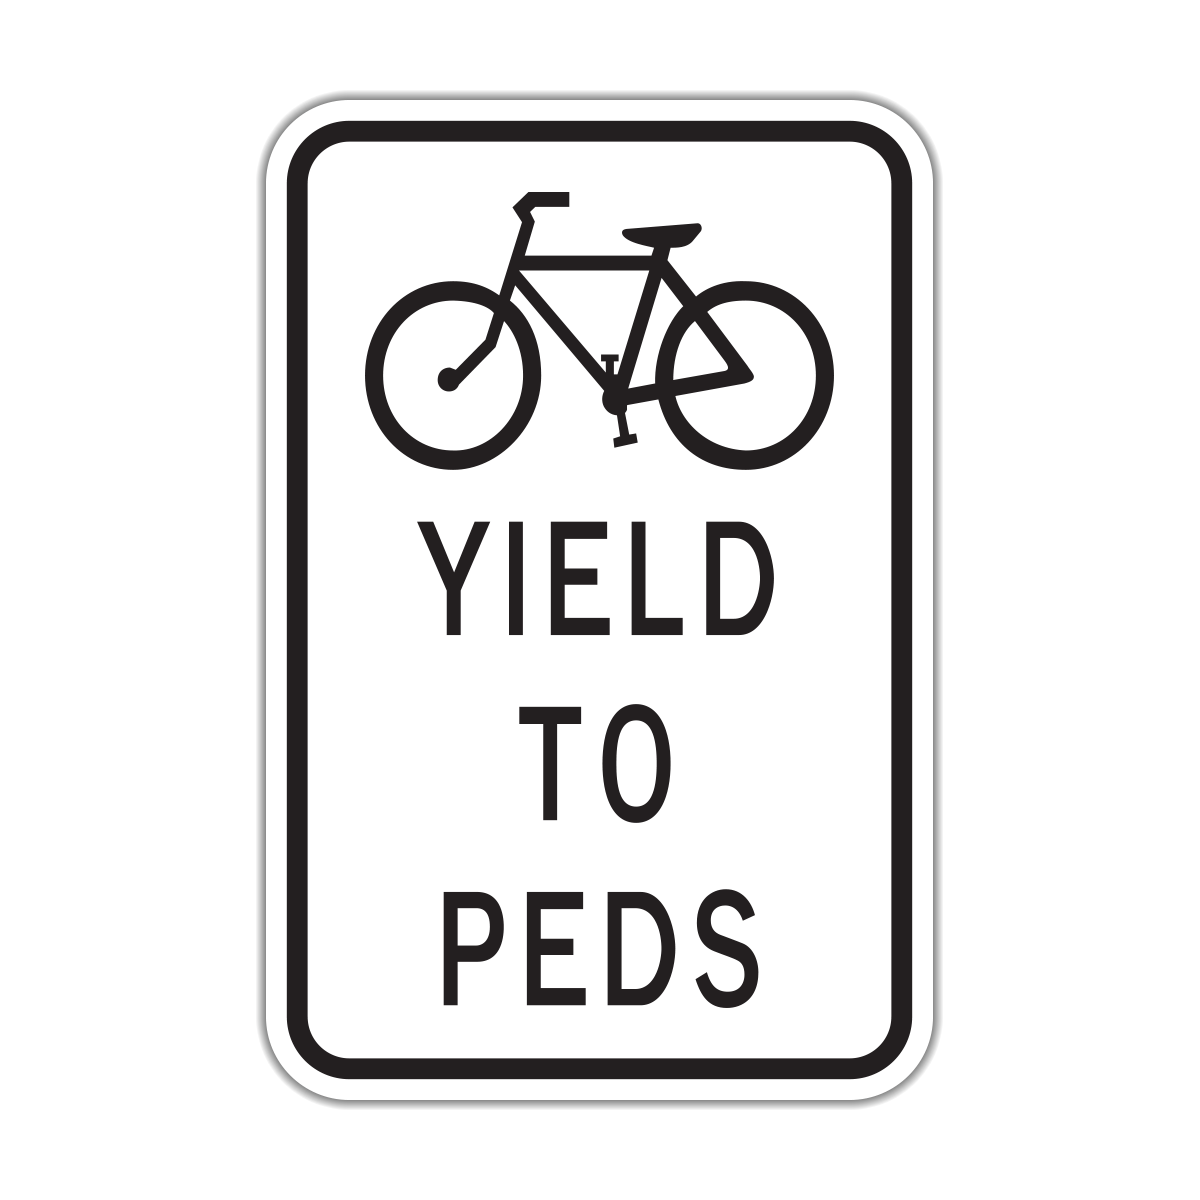 R9-6 Bicycles Yield To Peds